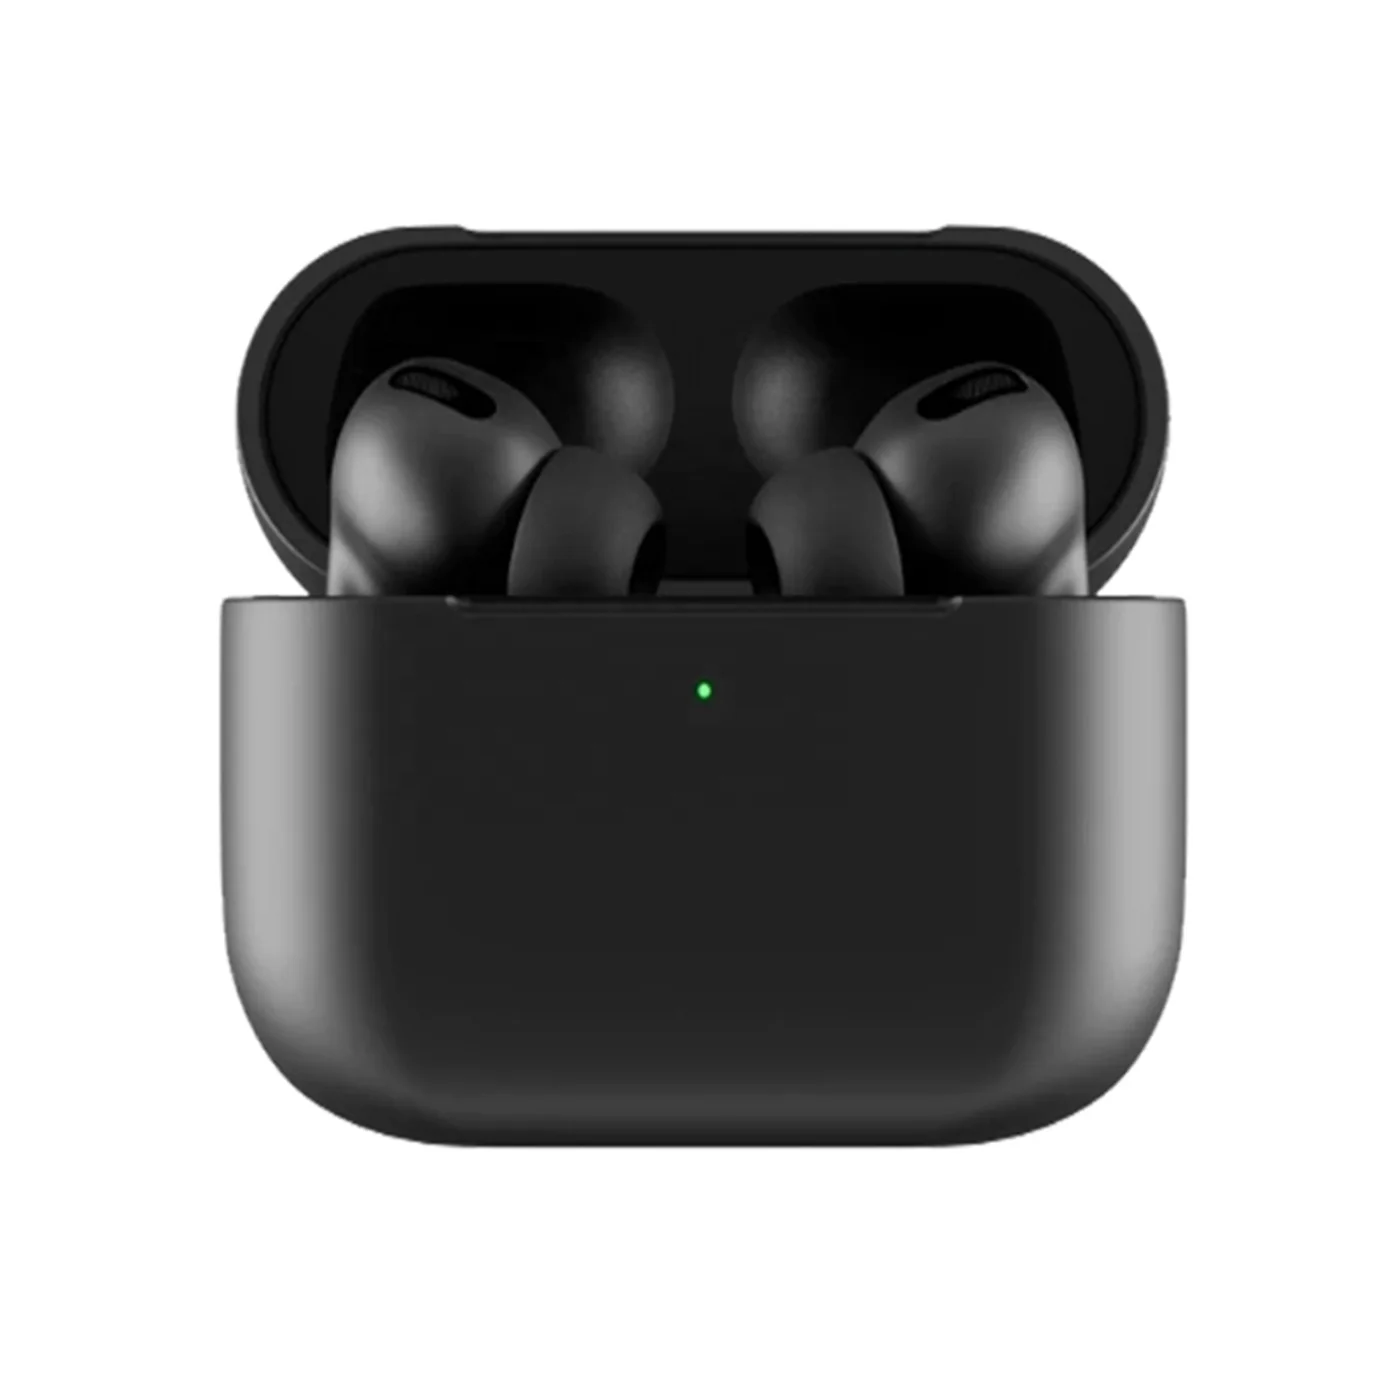 

Matte Black Rename Air 3 Pods i90000 Tws Pro Earbuds Wireless Earphone Name Charging with GPS, Accept customise